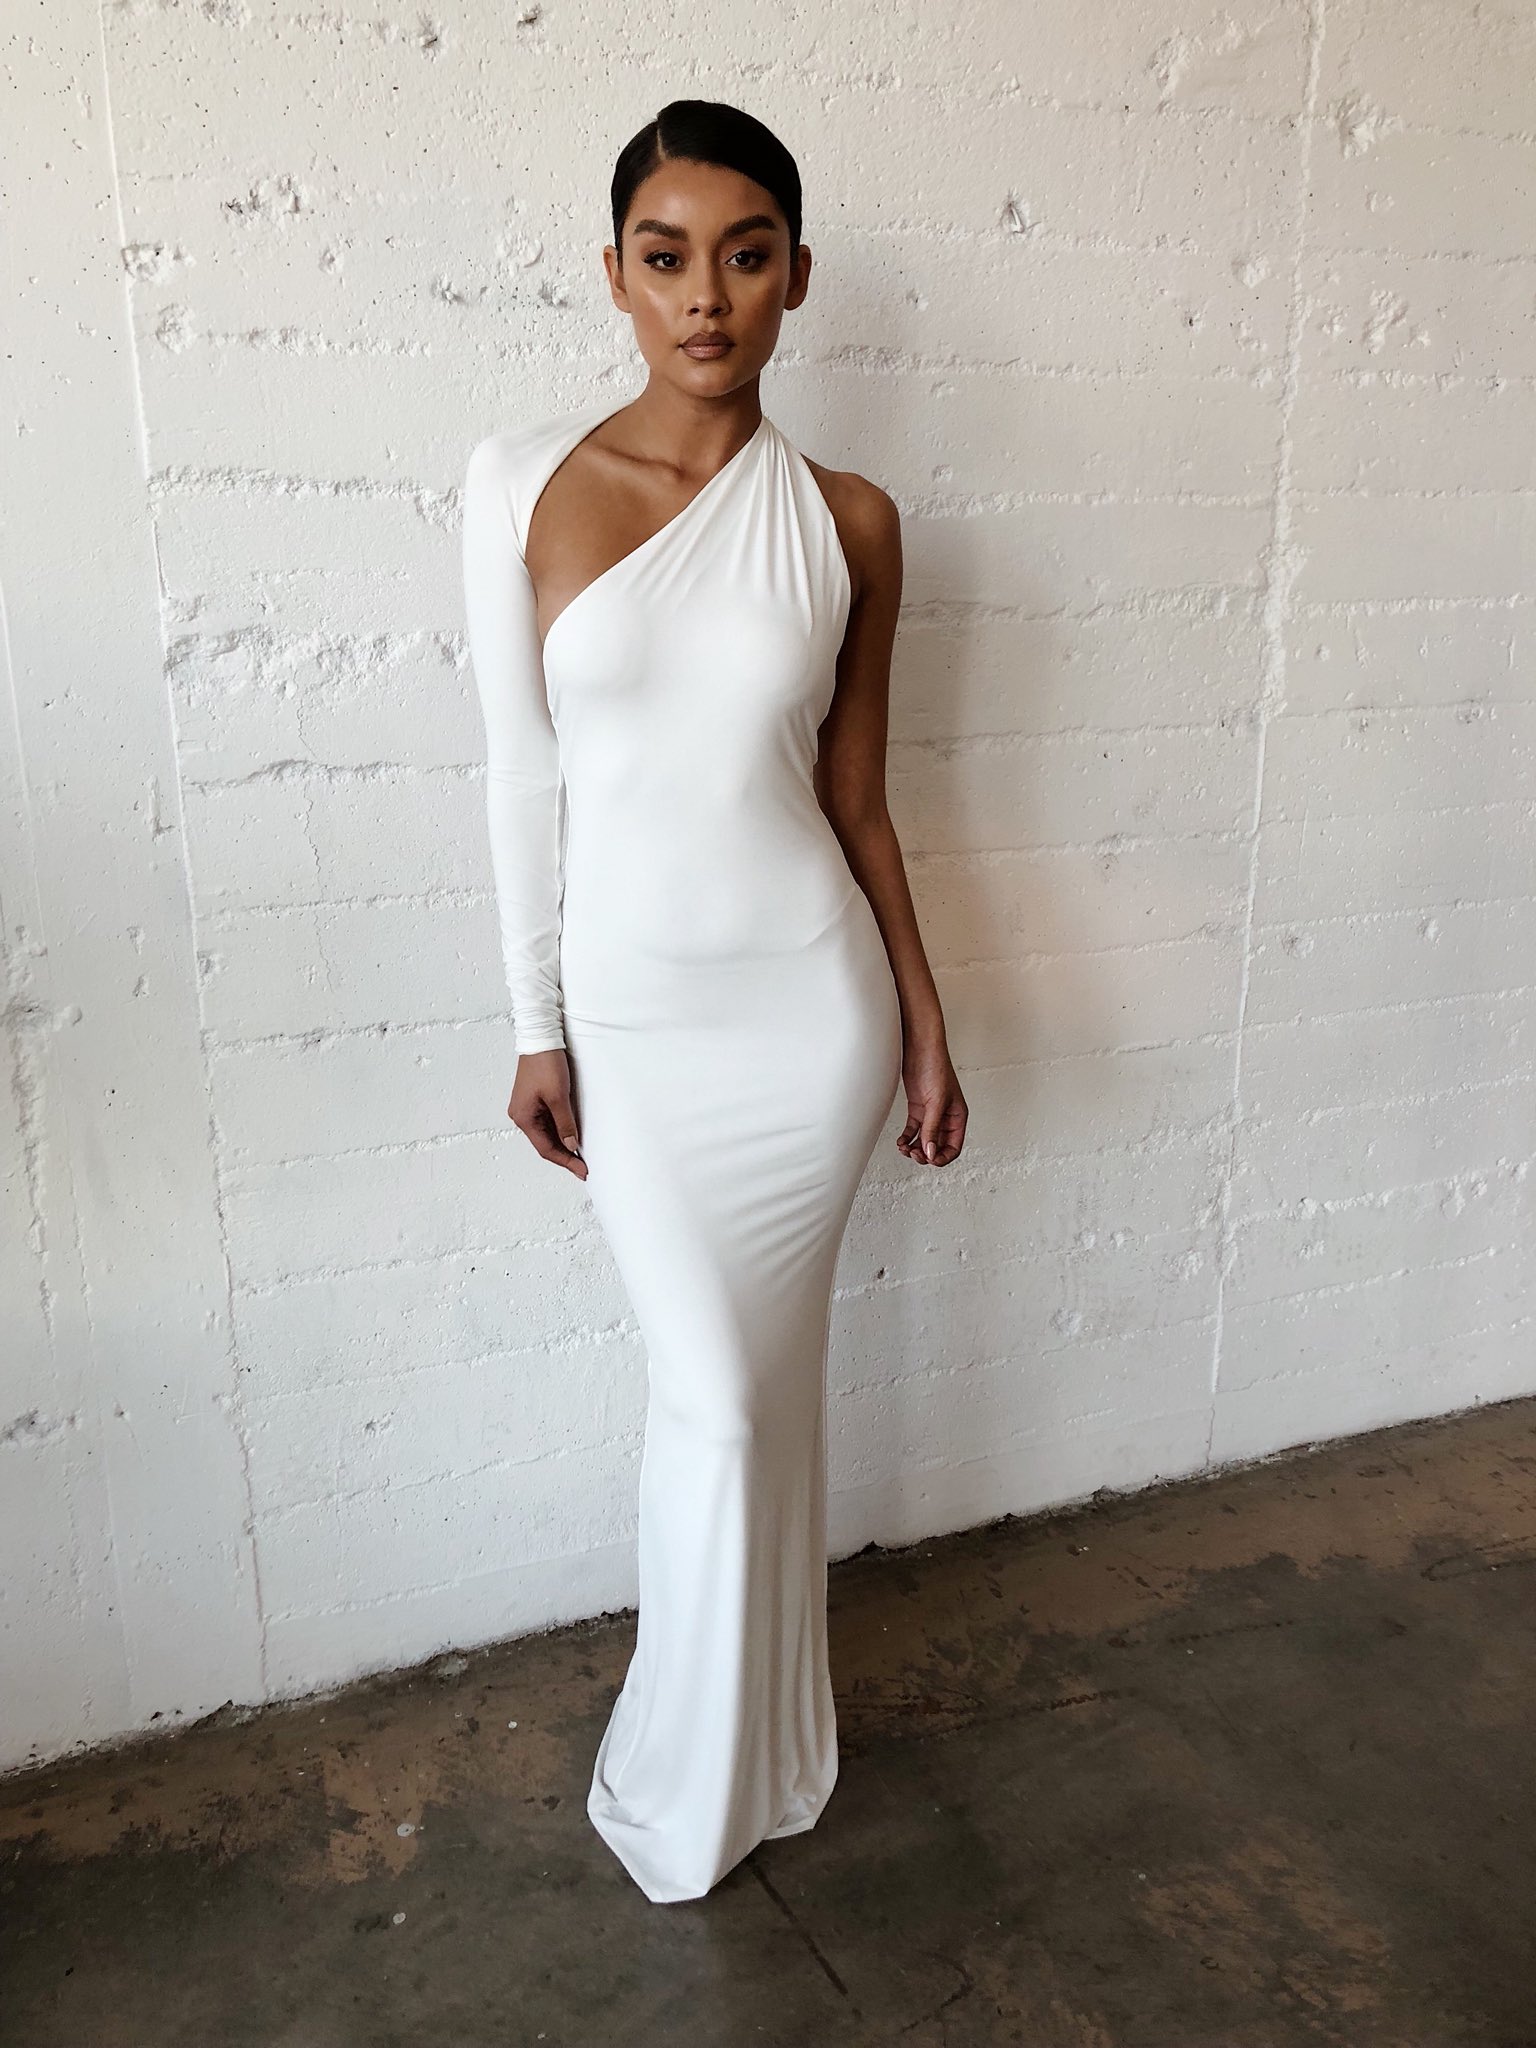 House of CB on Twitter: "Your OOTN is sorted with our ‘Merveille’ maxi